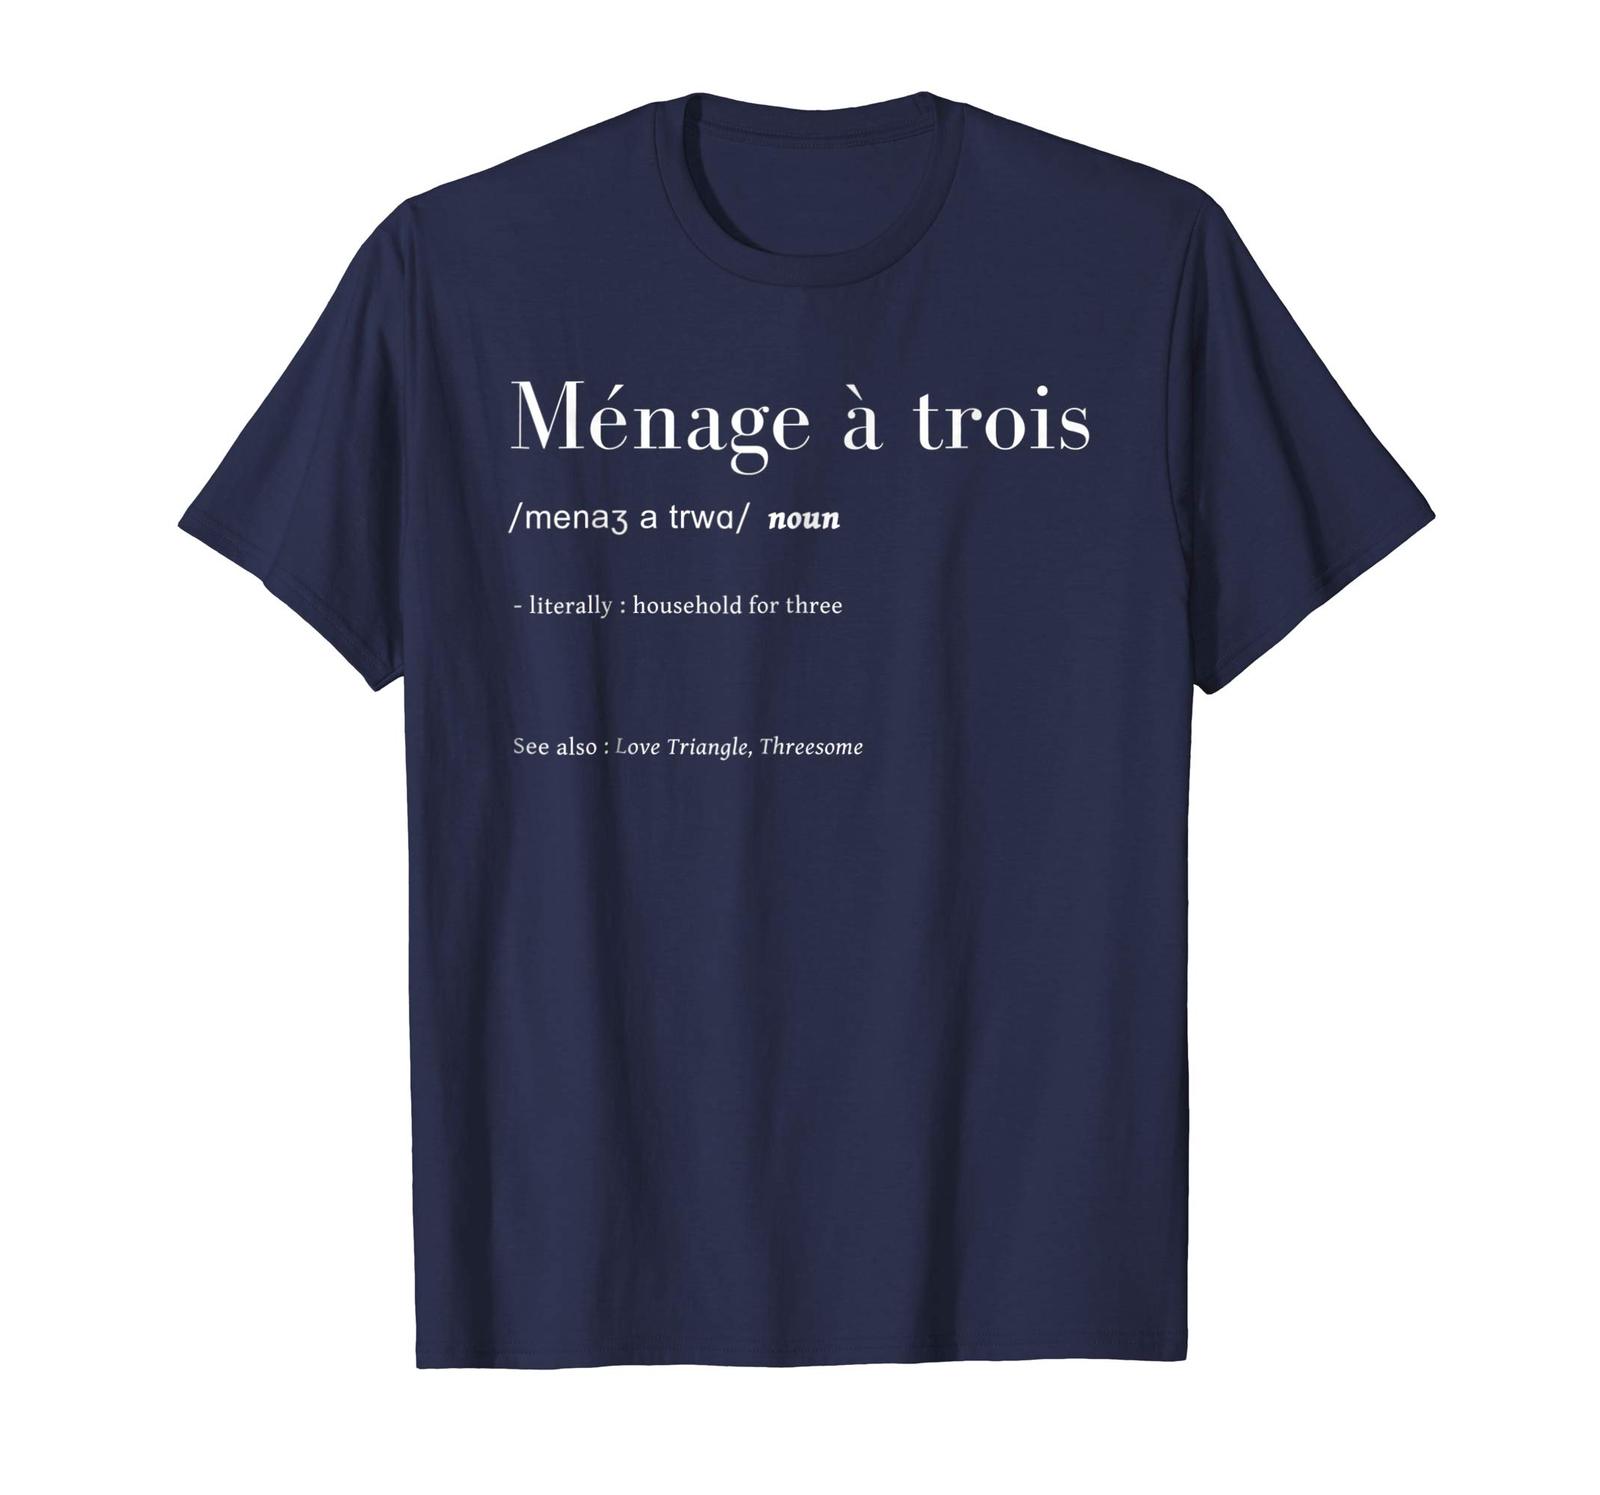 Teacher Style - French Dictionary Definition Tee - Menage a trois Men ...